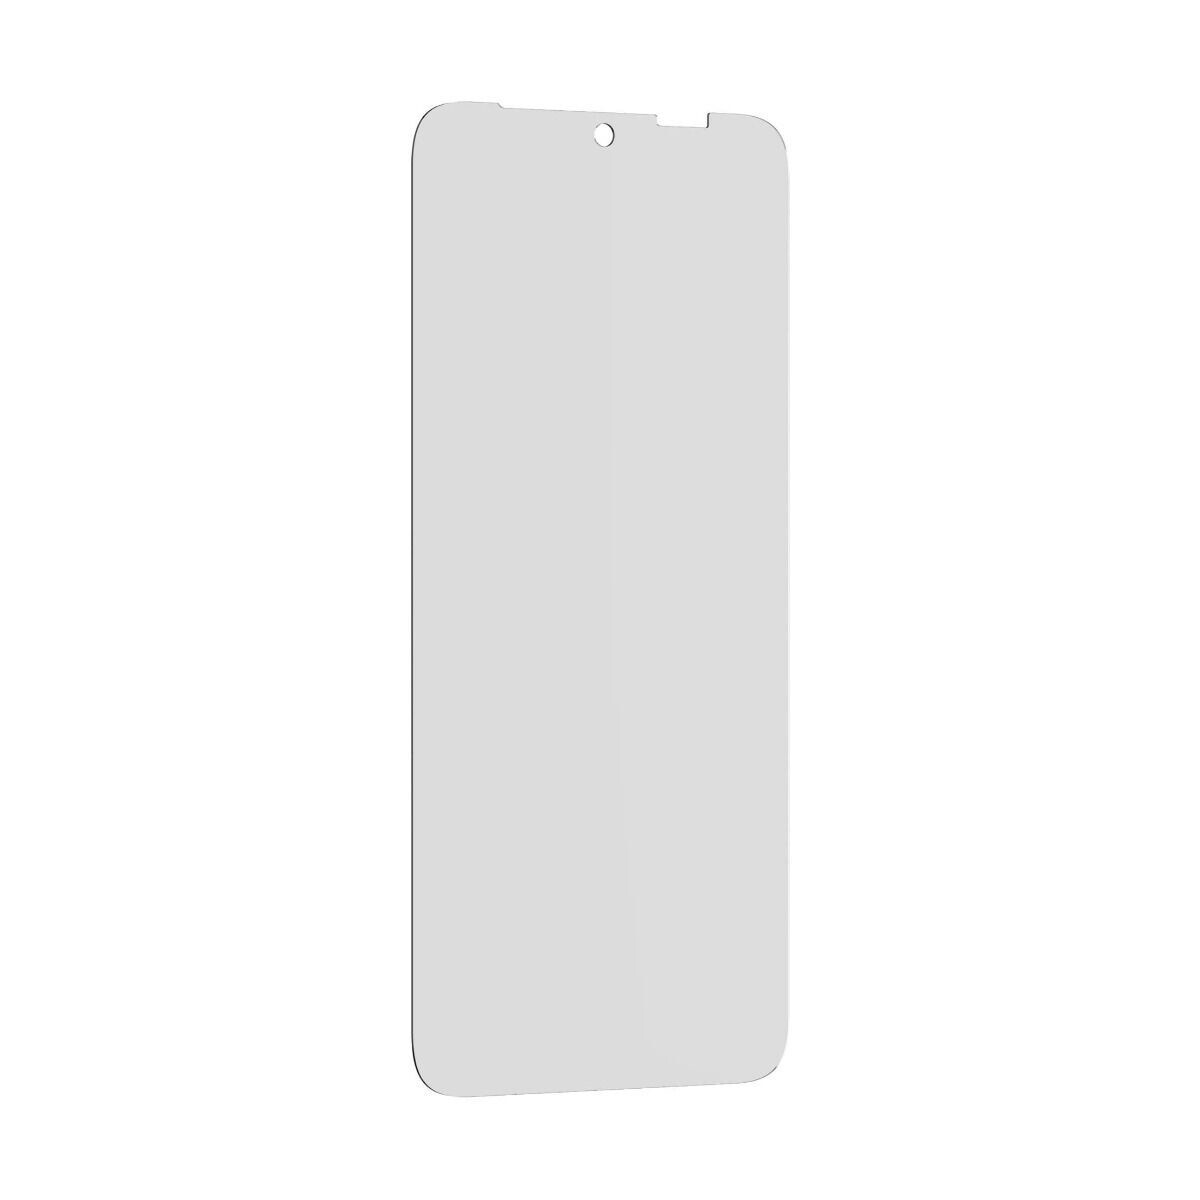 Fairphone F4PRTC-1PF-WW1 - Frameless display privacy filter for Fairphone 4